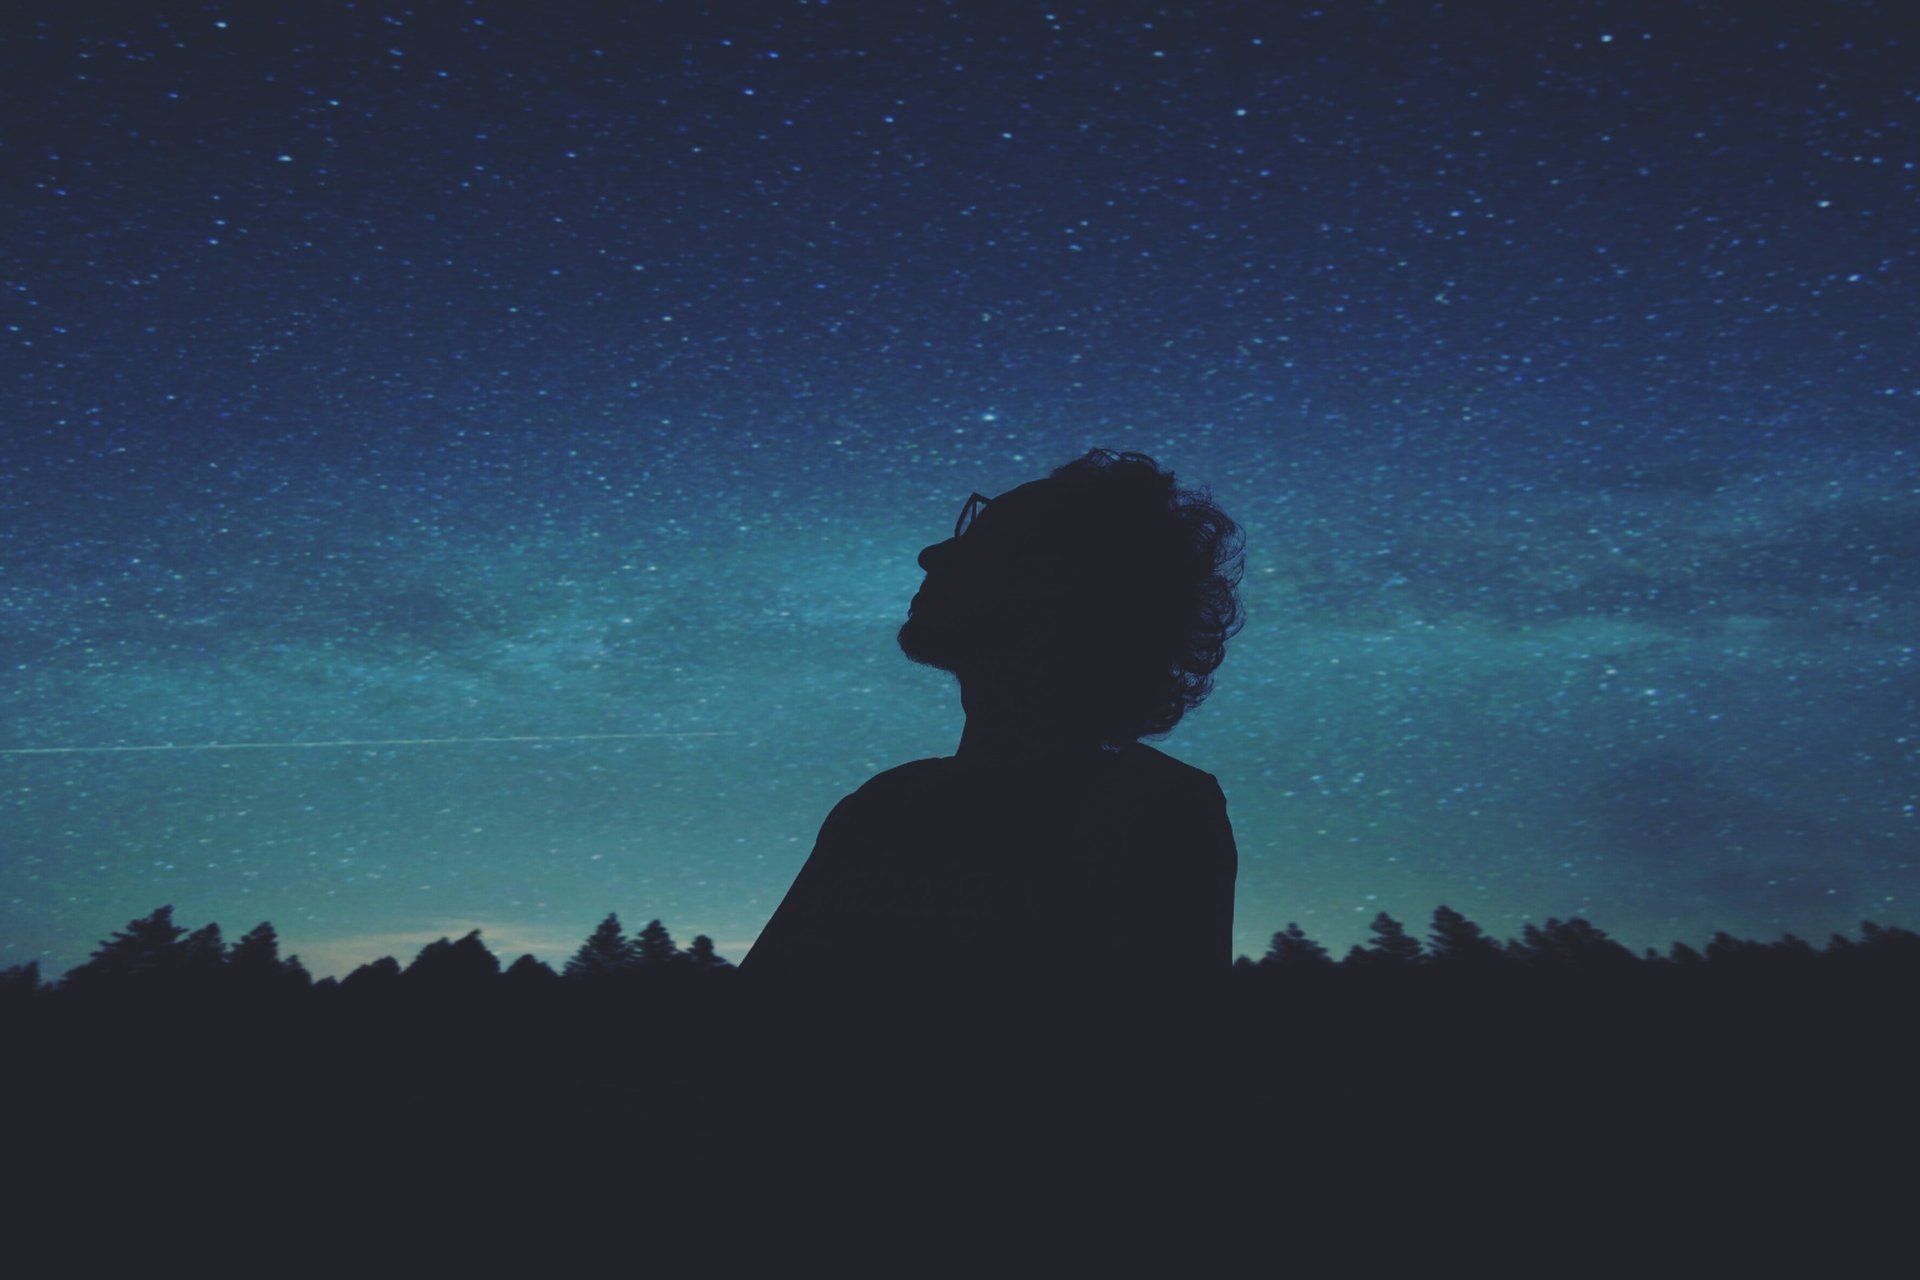 dark treeline with dark blue sky and silhouette of person looking up towards sky